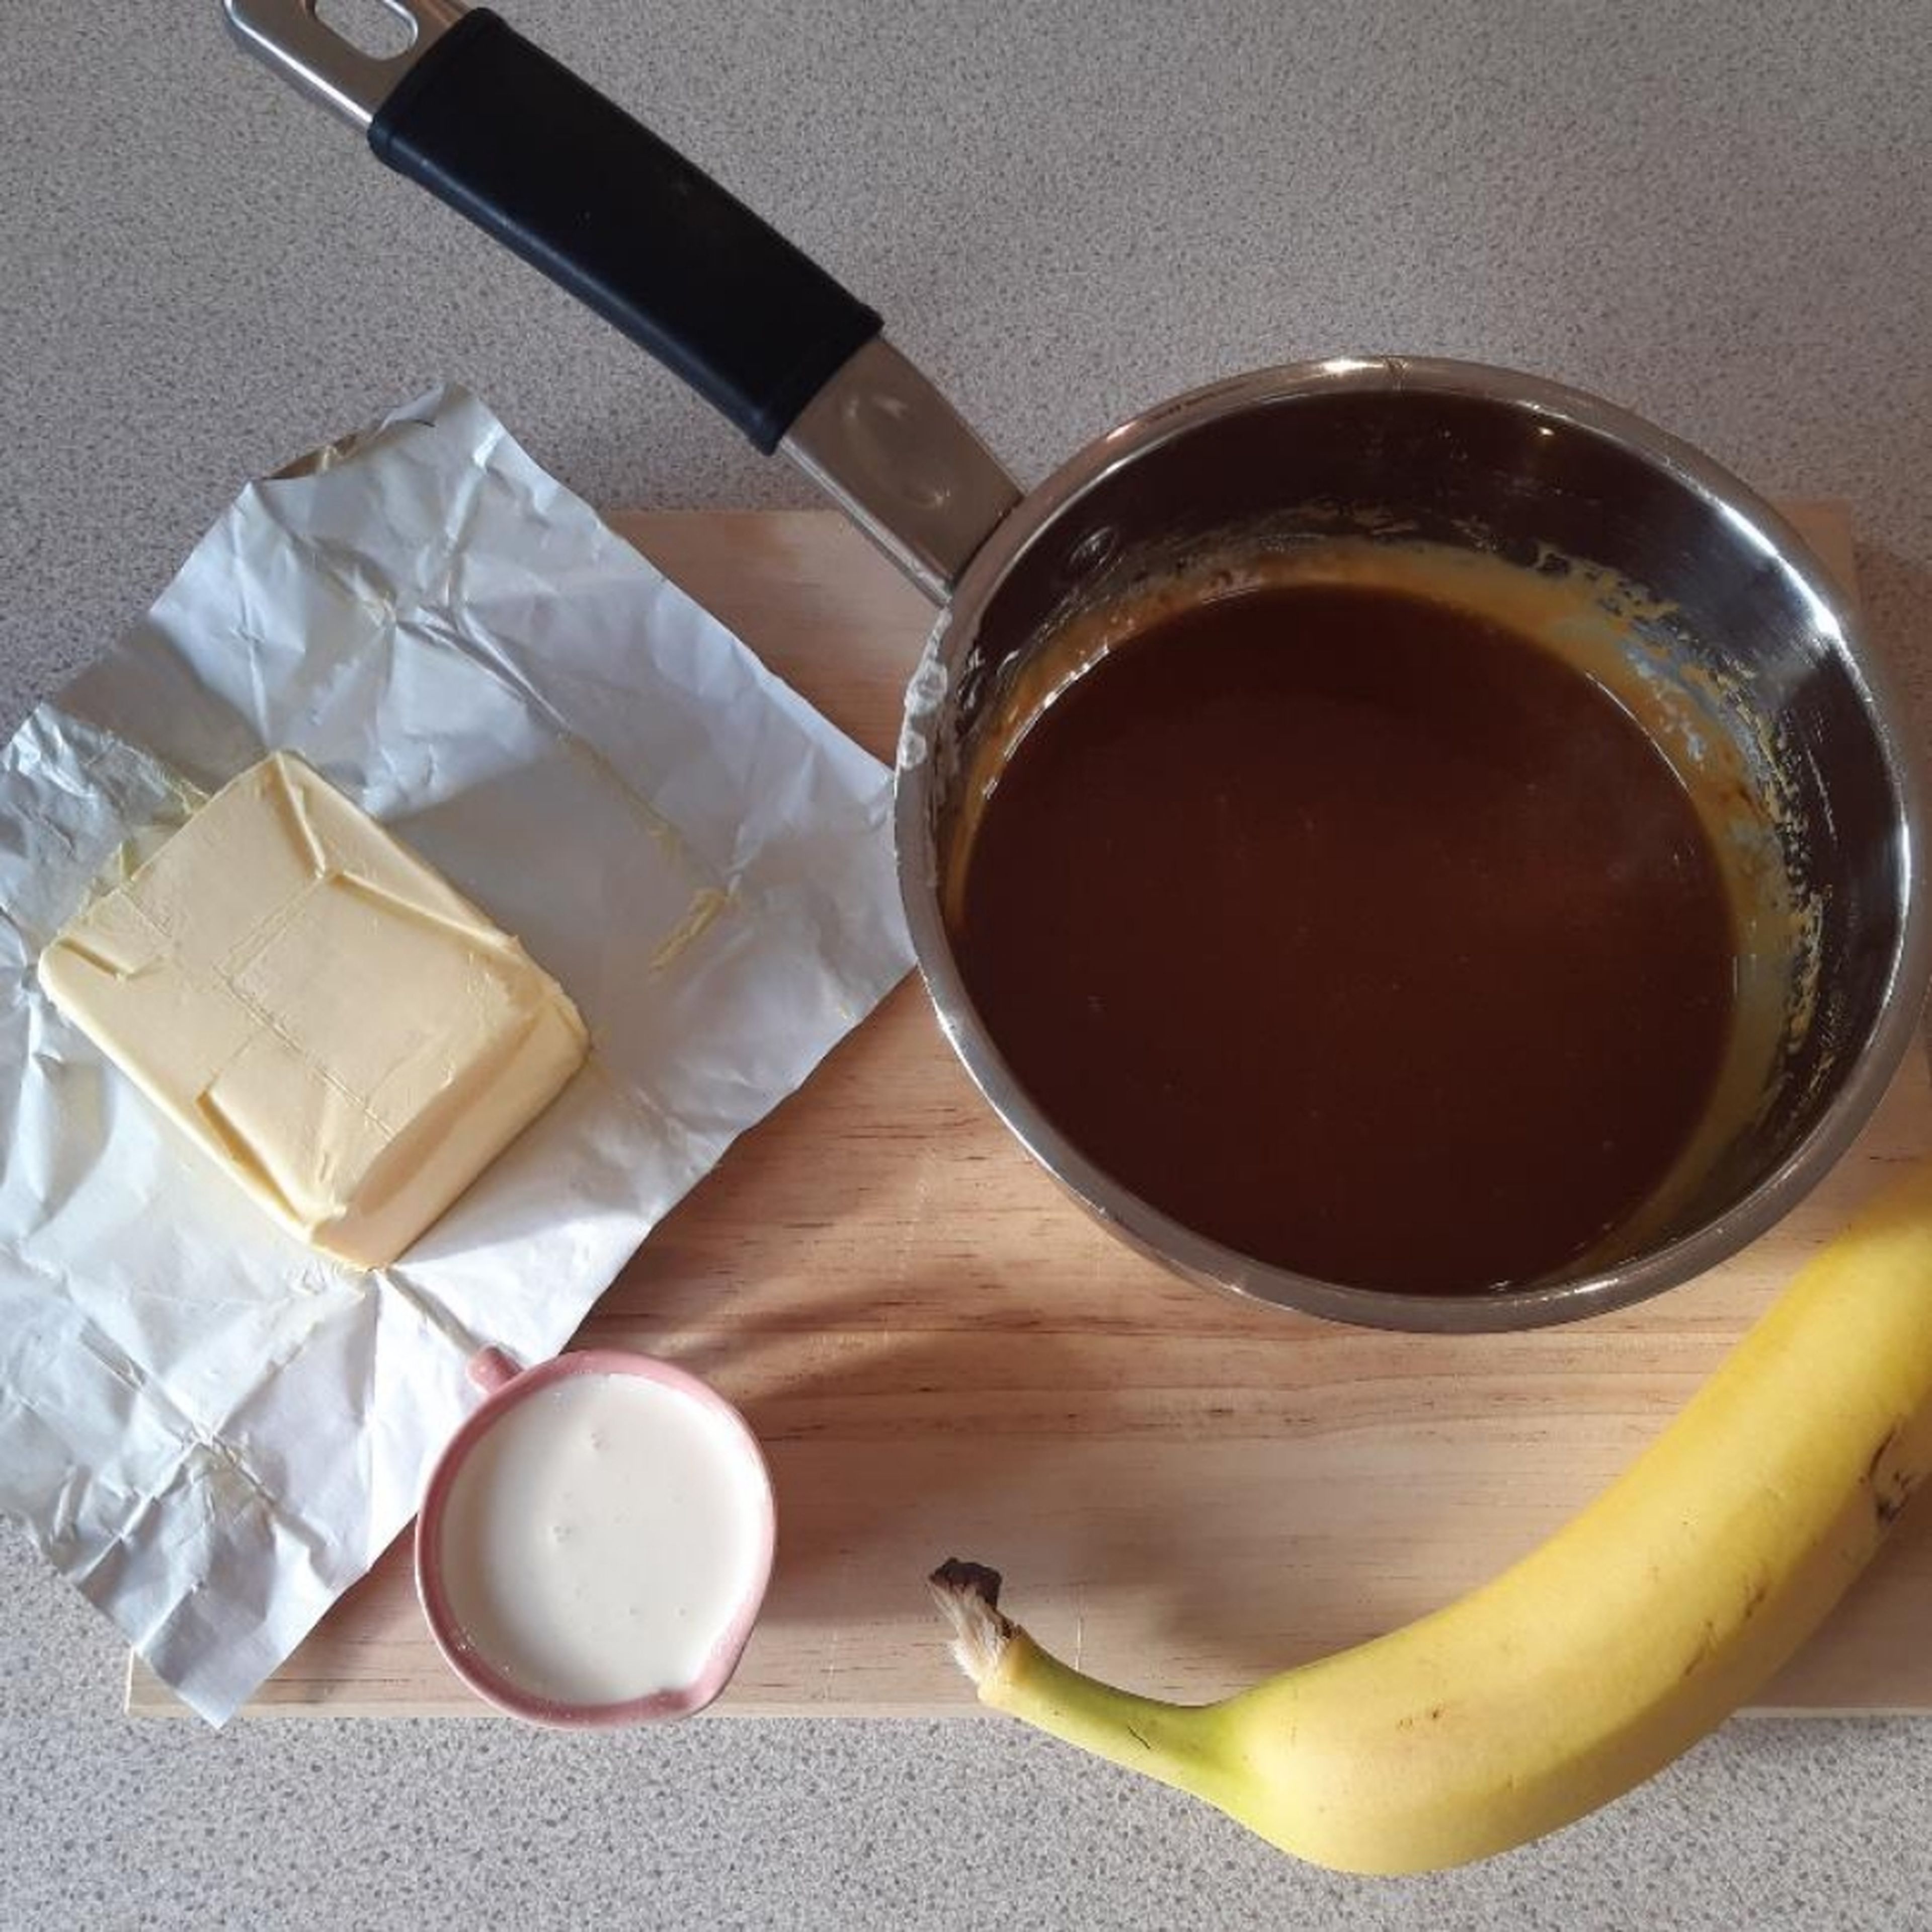 To make the caramel, place the sugar and water in the saucepan and allow the sugar to dissolve over a low heat. When dissolved, the sugar liquid will start to colour. When it reaches a light amber colour add the butter and whisk. Take the saucepan off the heat, whisk in the cream and add the rum. (Rum is optional)